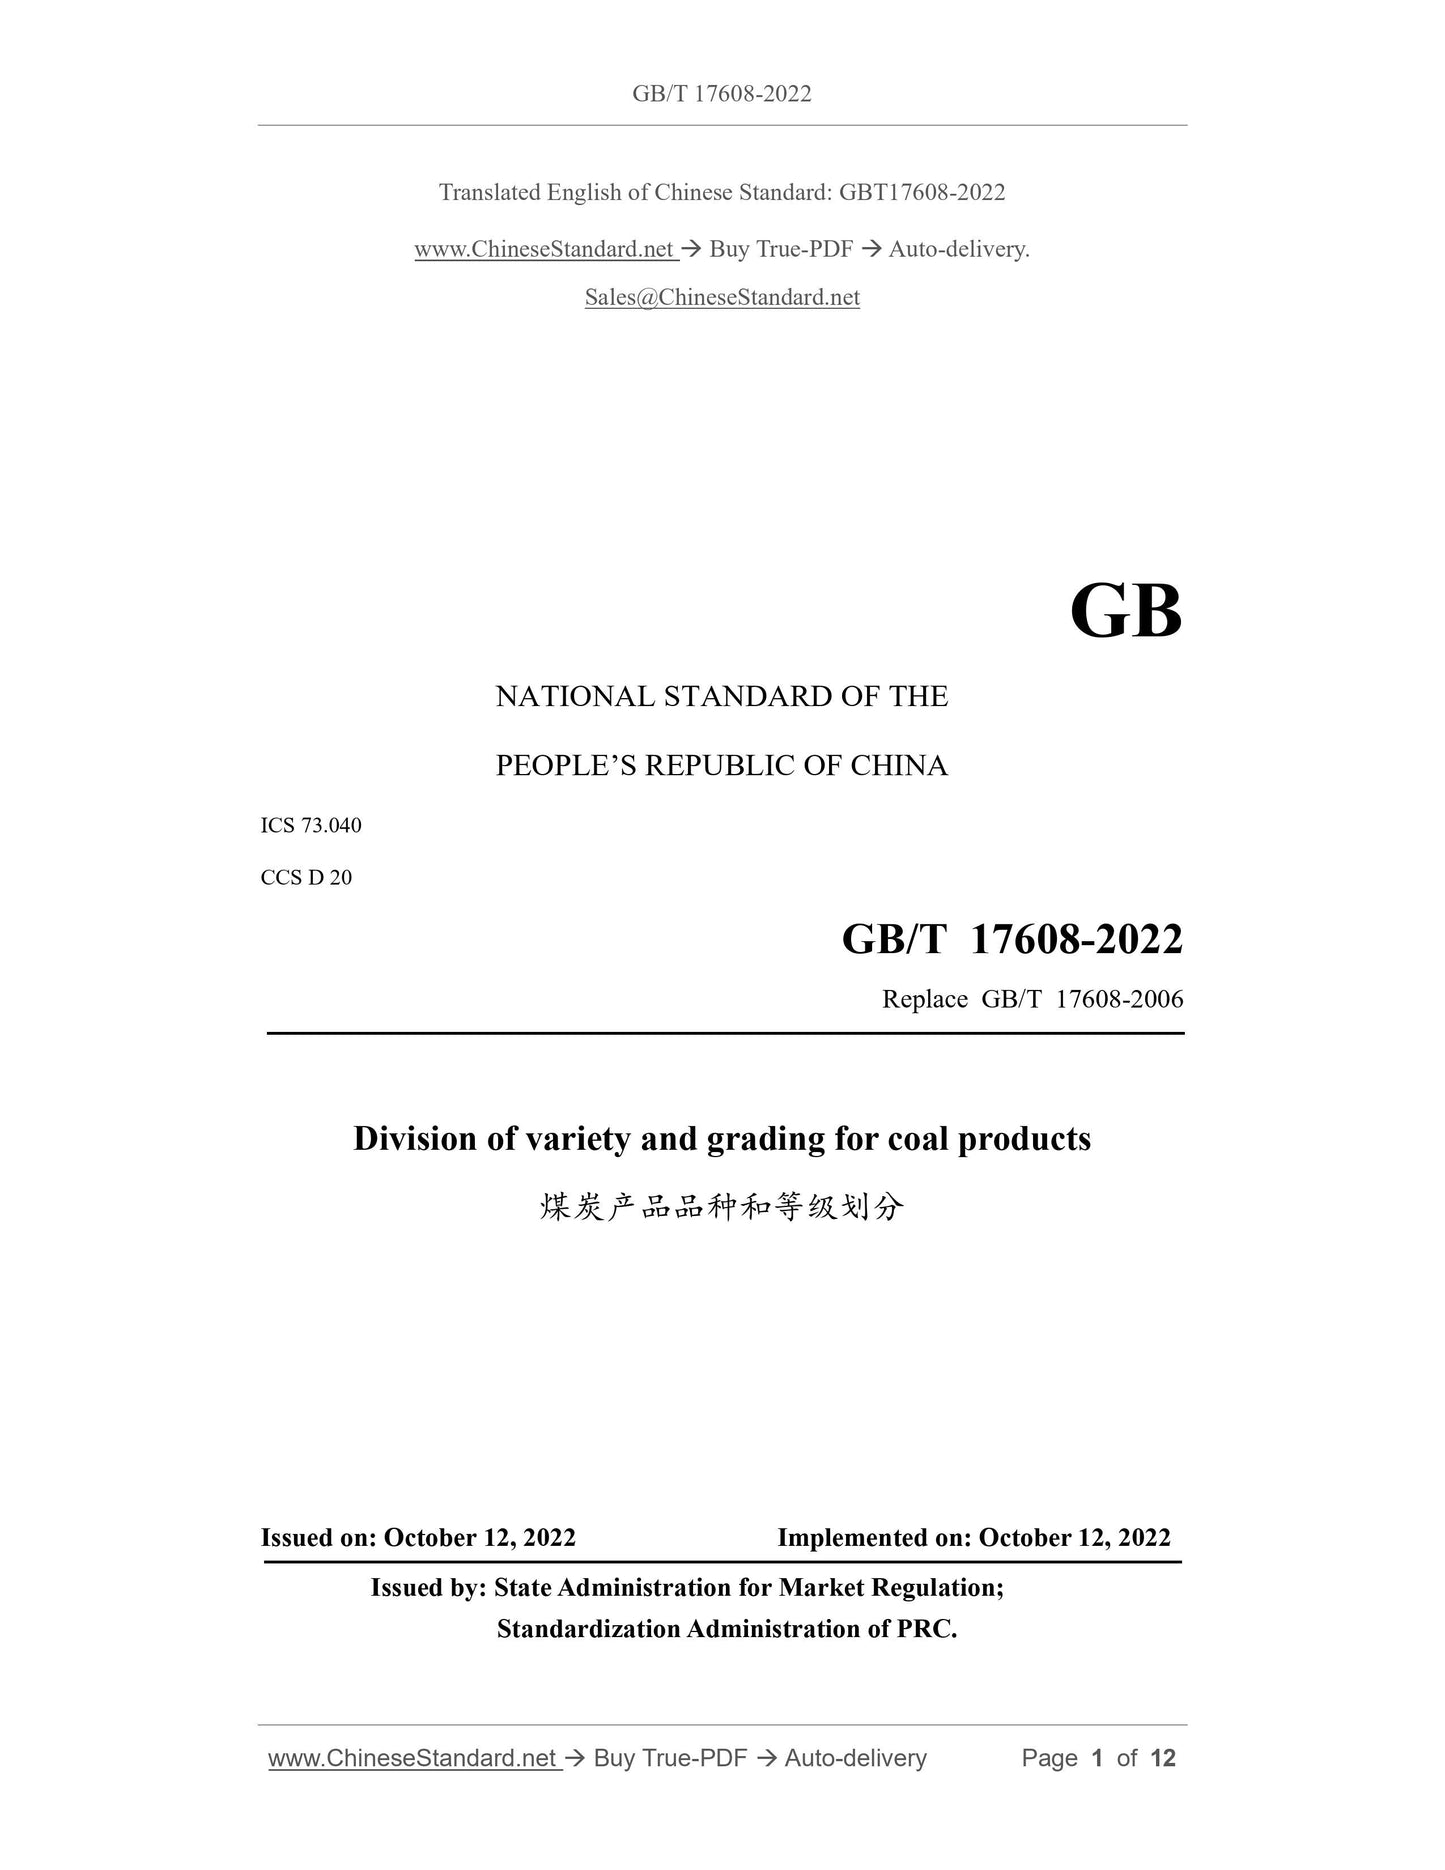 GB/T 17608-2022 Page 1